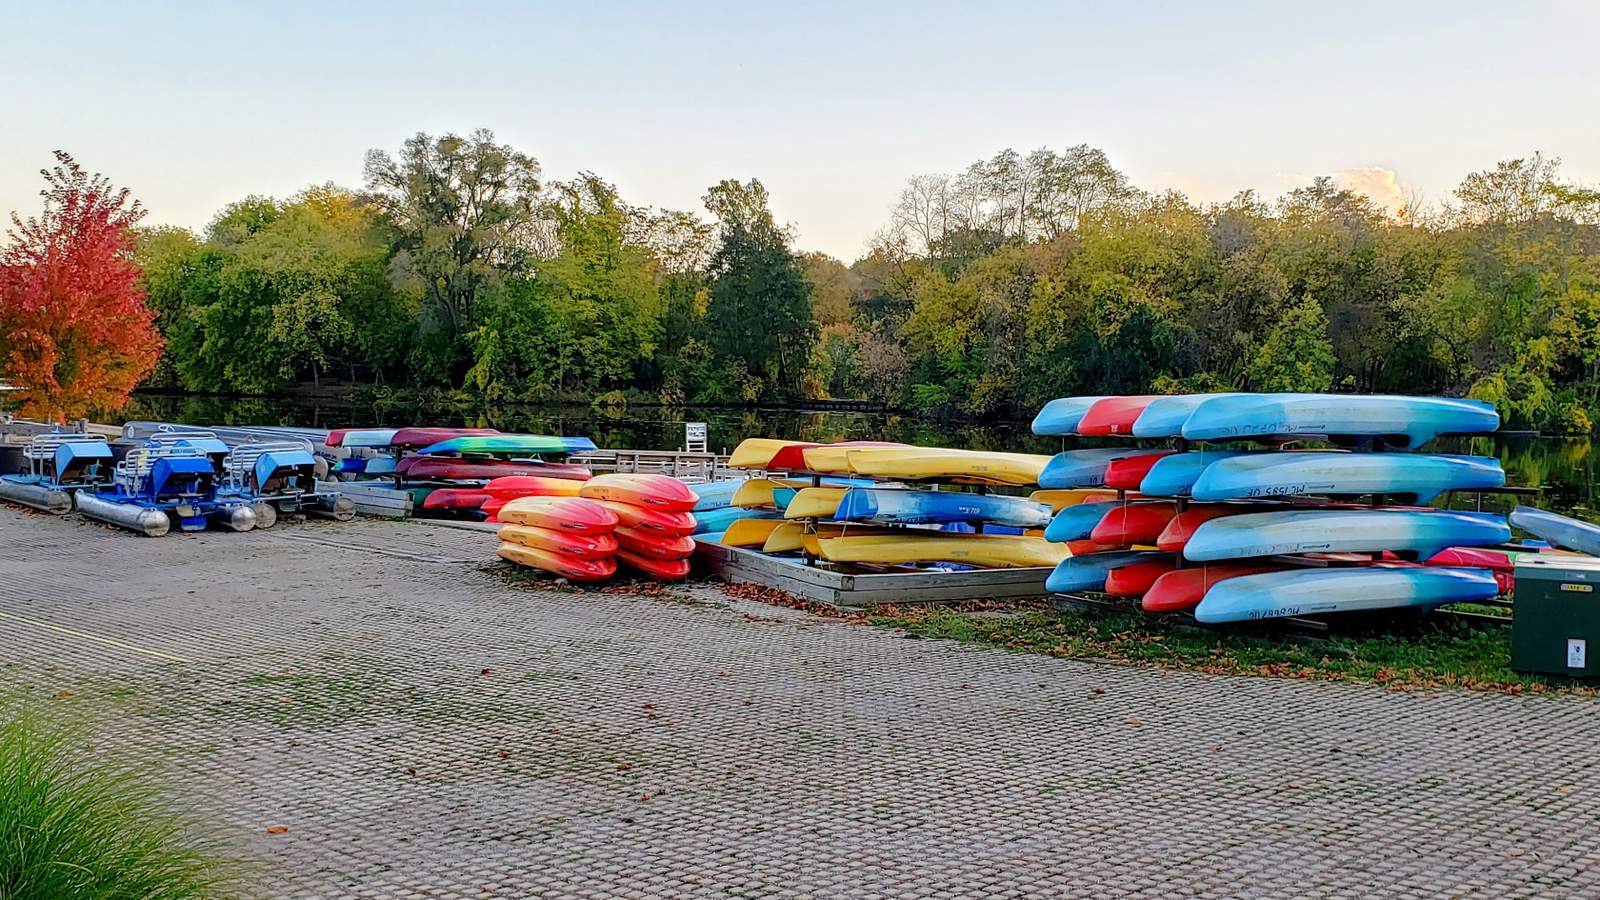 Boat rentals at Ann Arbor’s Gallup Park livery to open Saturday